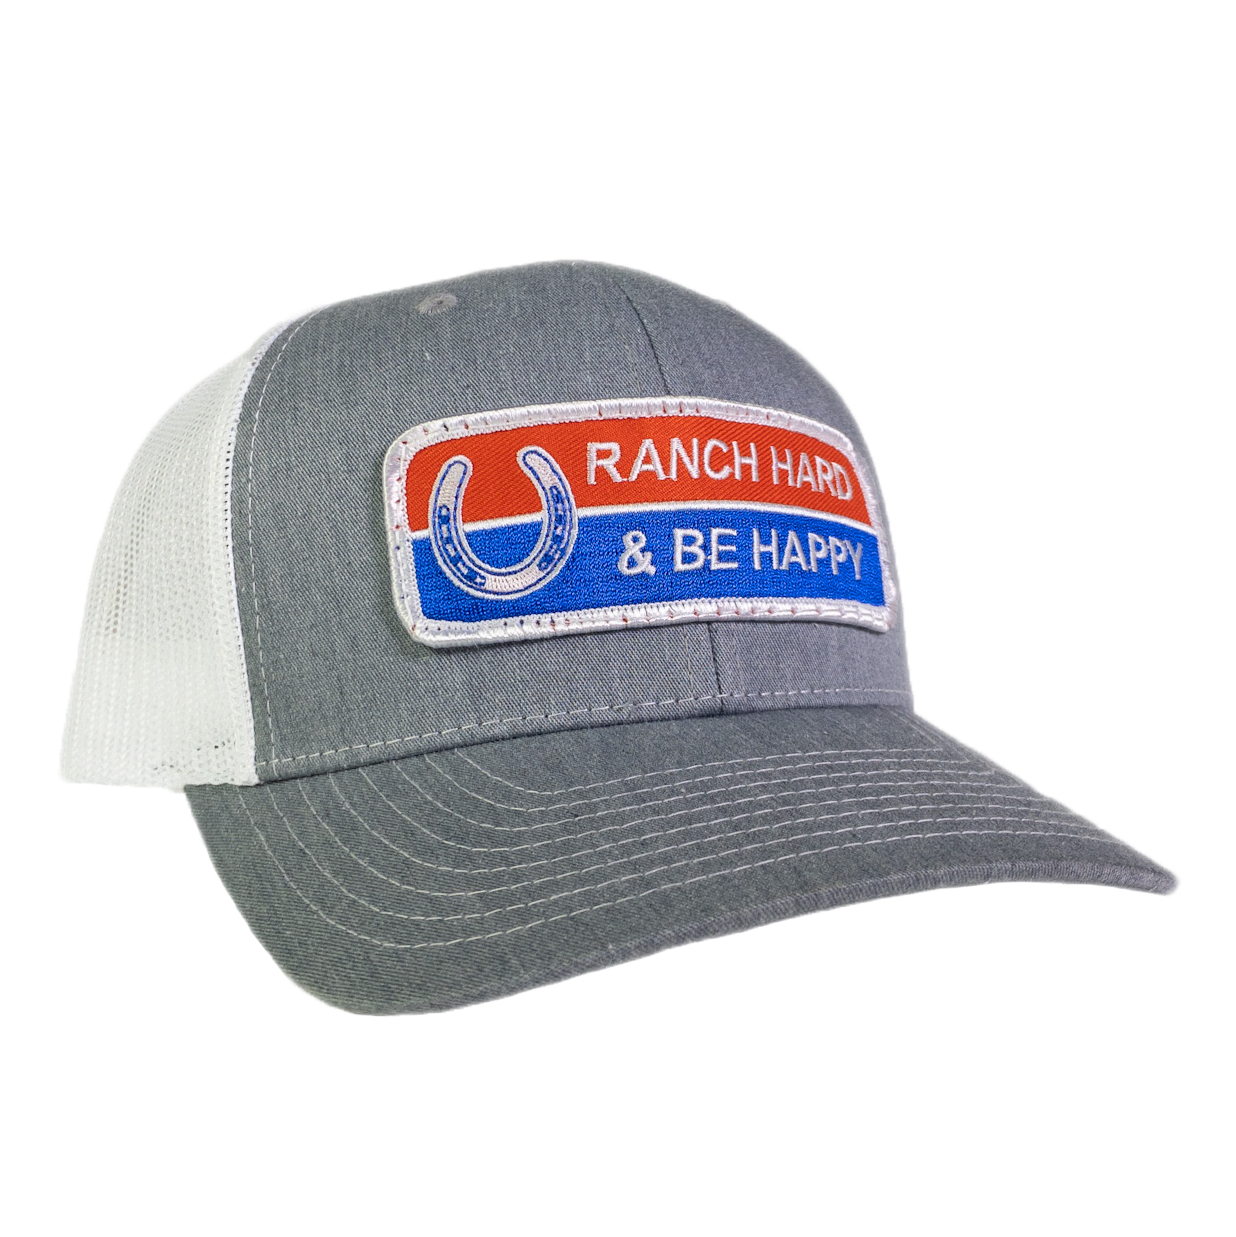 Ranch Hard Be Happy Silver & White Mesh Precurved